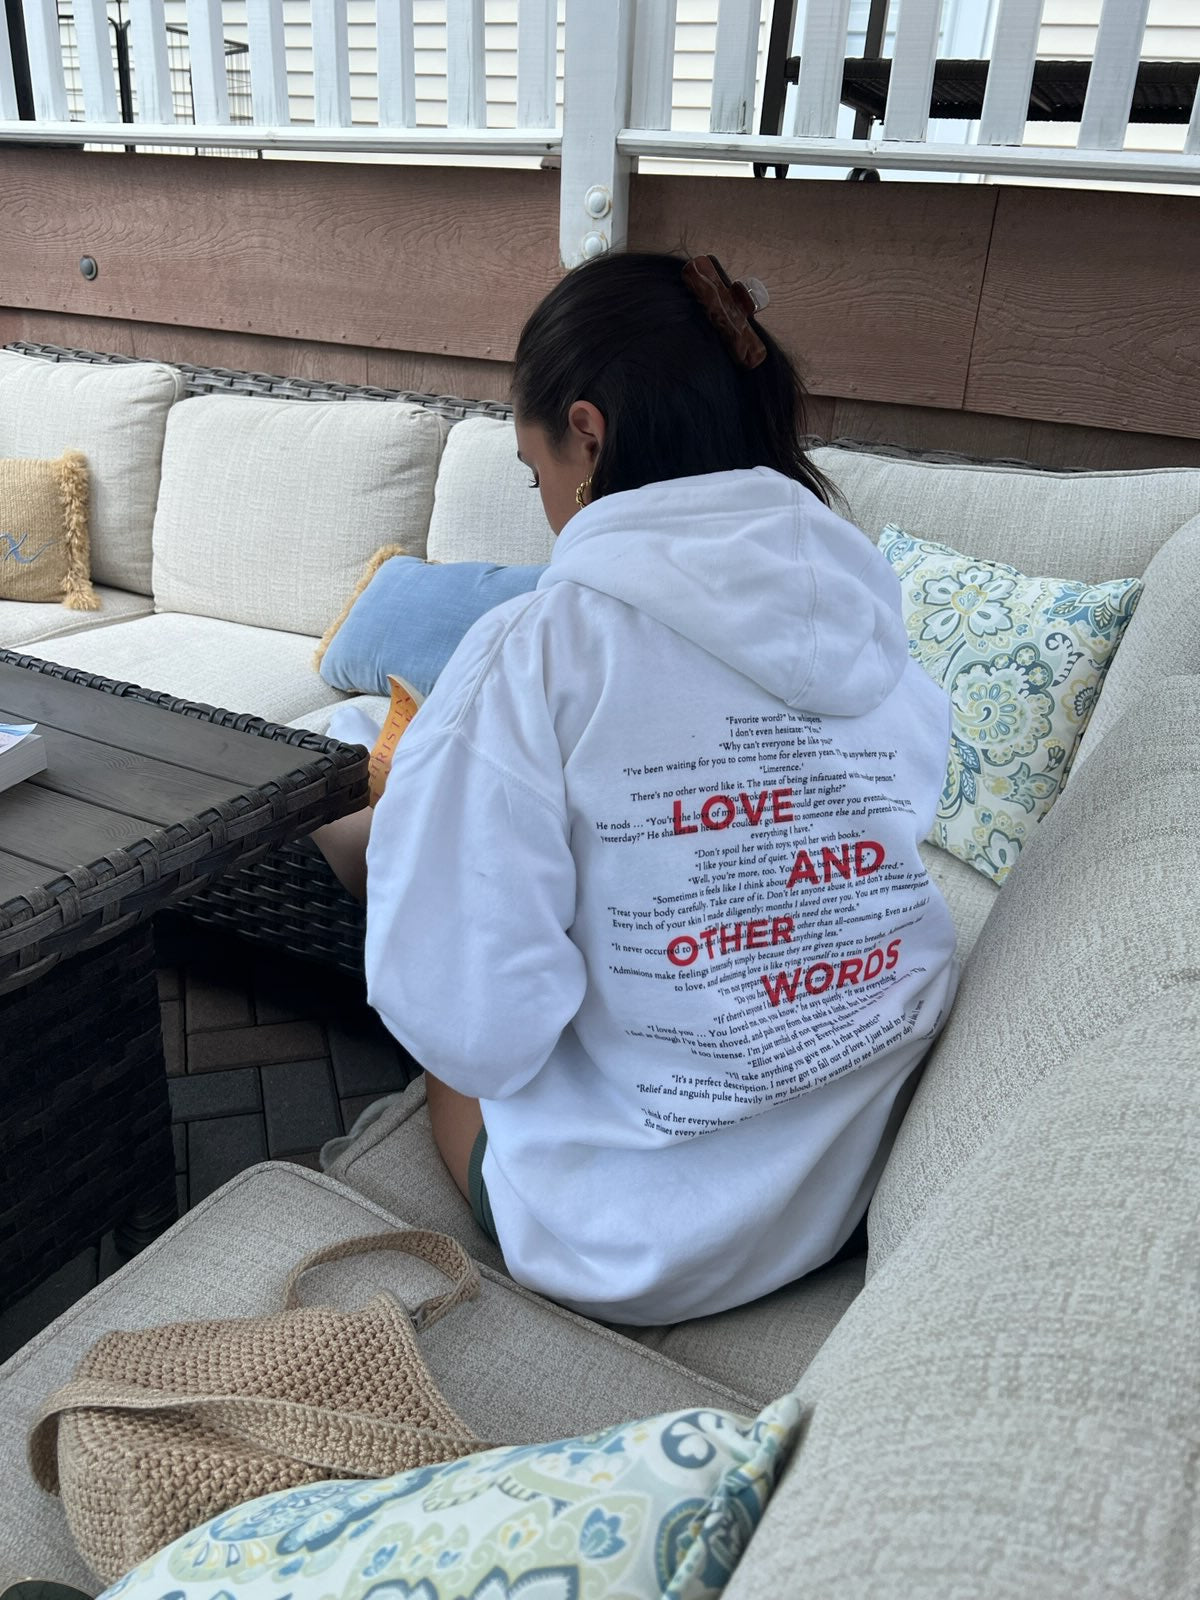 Love and Other Words Hoodie